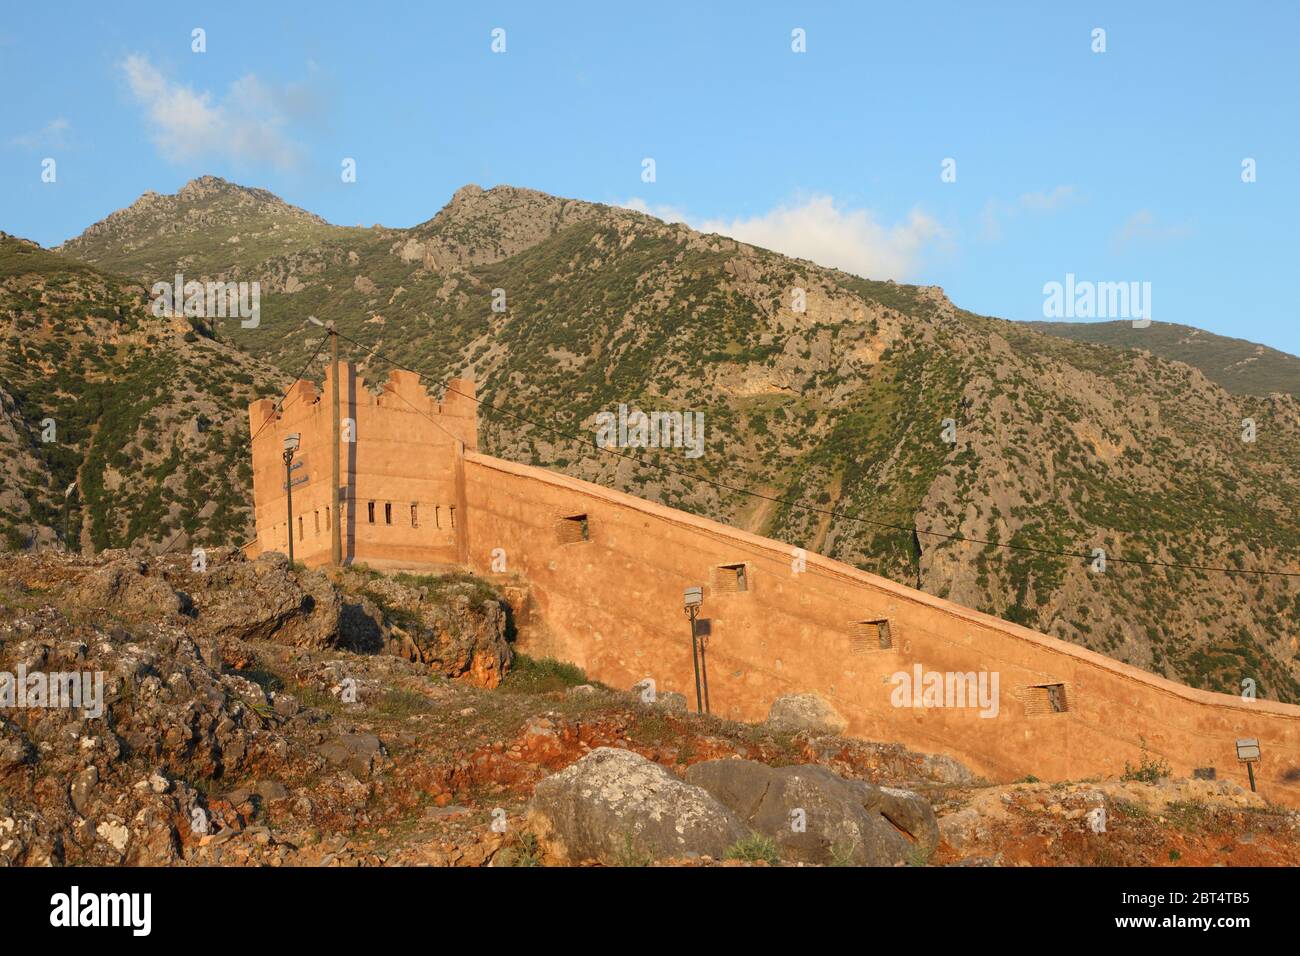 africa, wall, fortress, style of construction, architecture, architectural Stock Photo